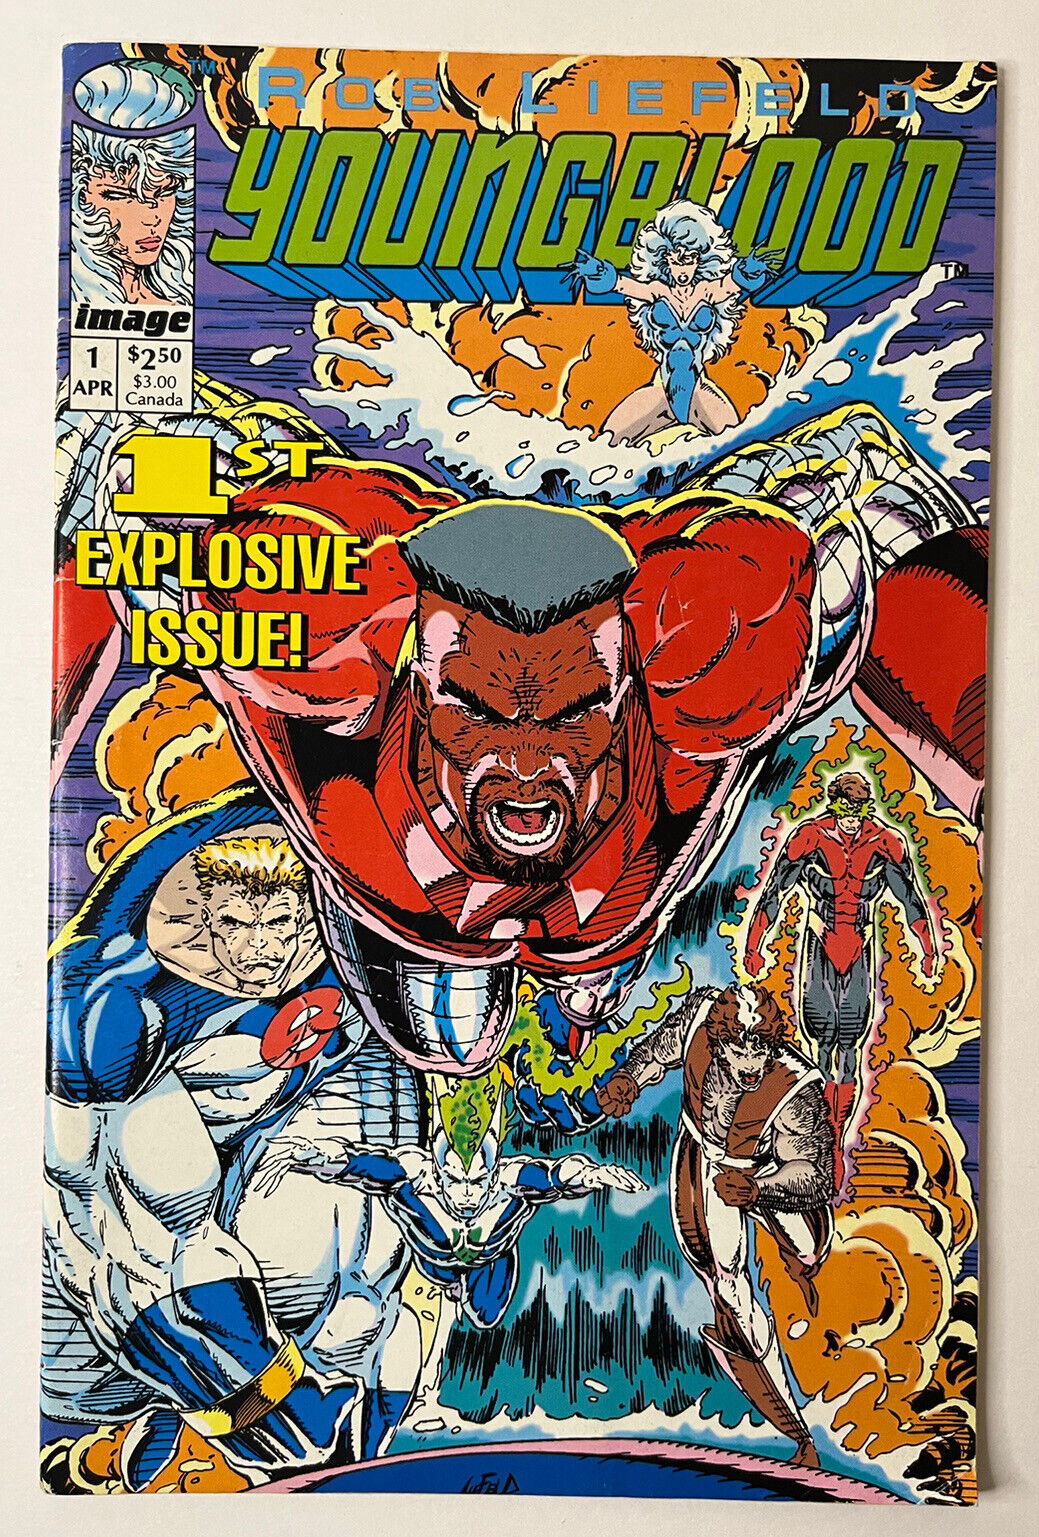 Youngblood #1 Apr 1992 ✅ Flip Book w/Cards Intact -First Printing ✅ Image Comics